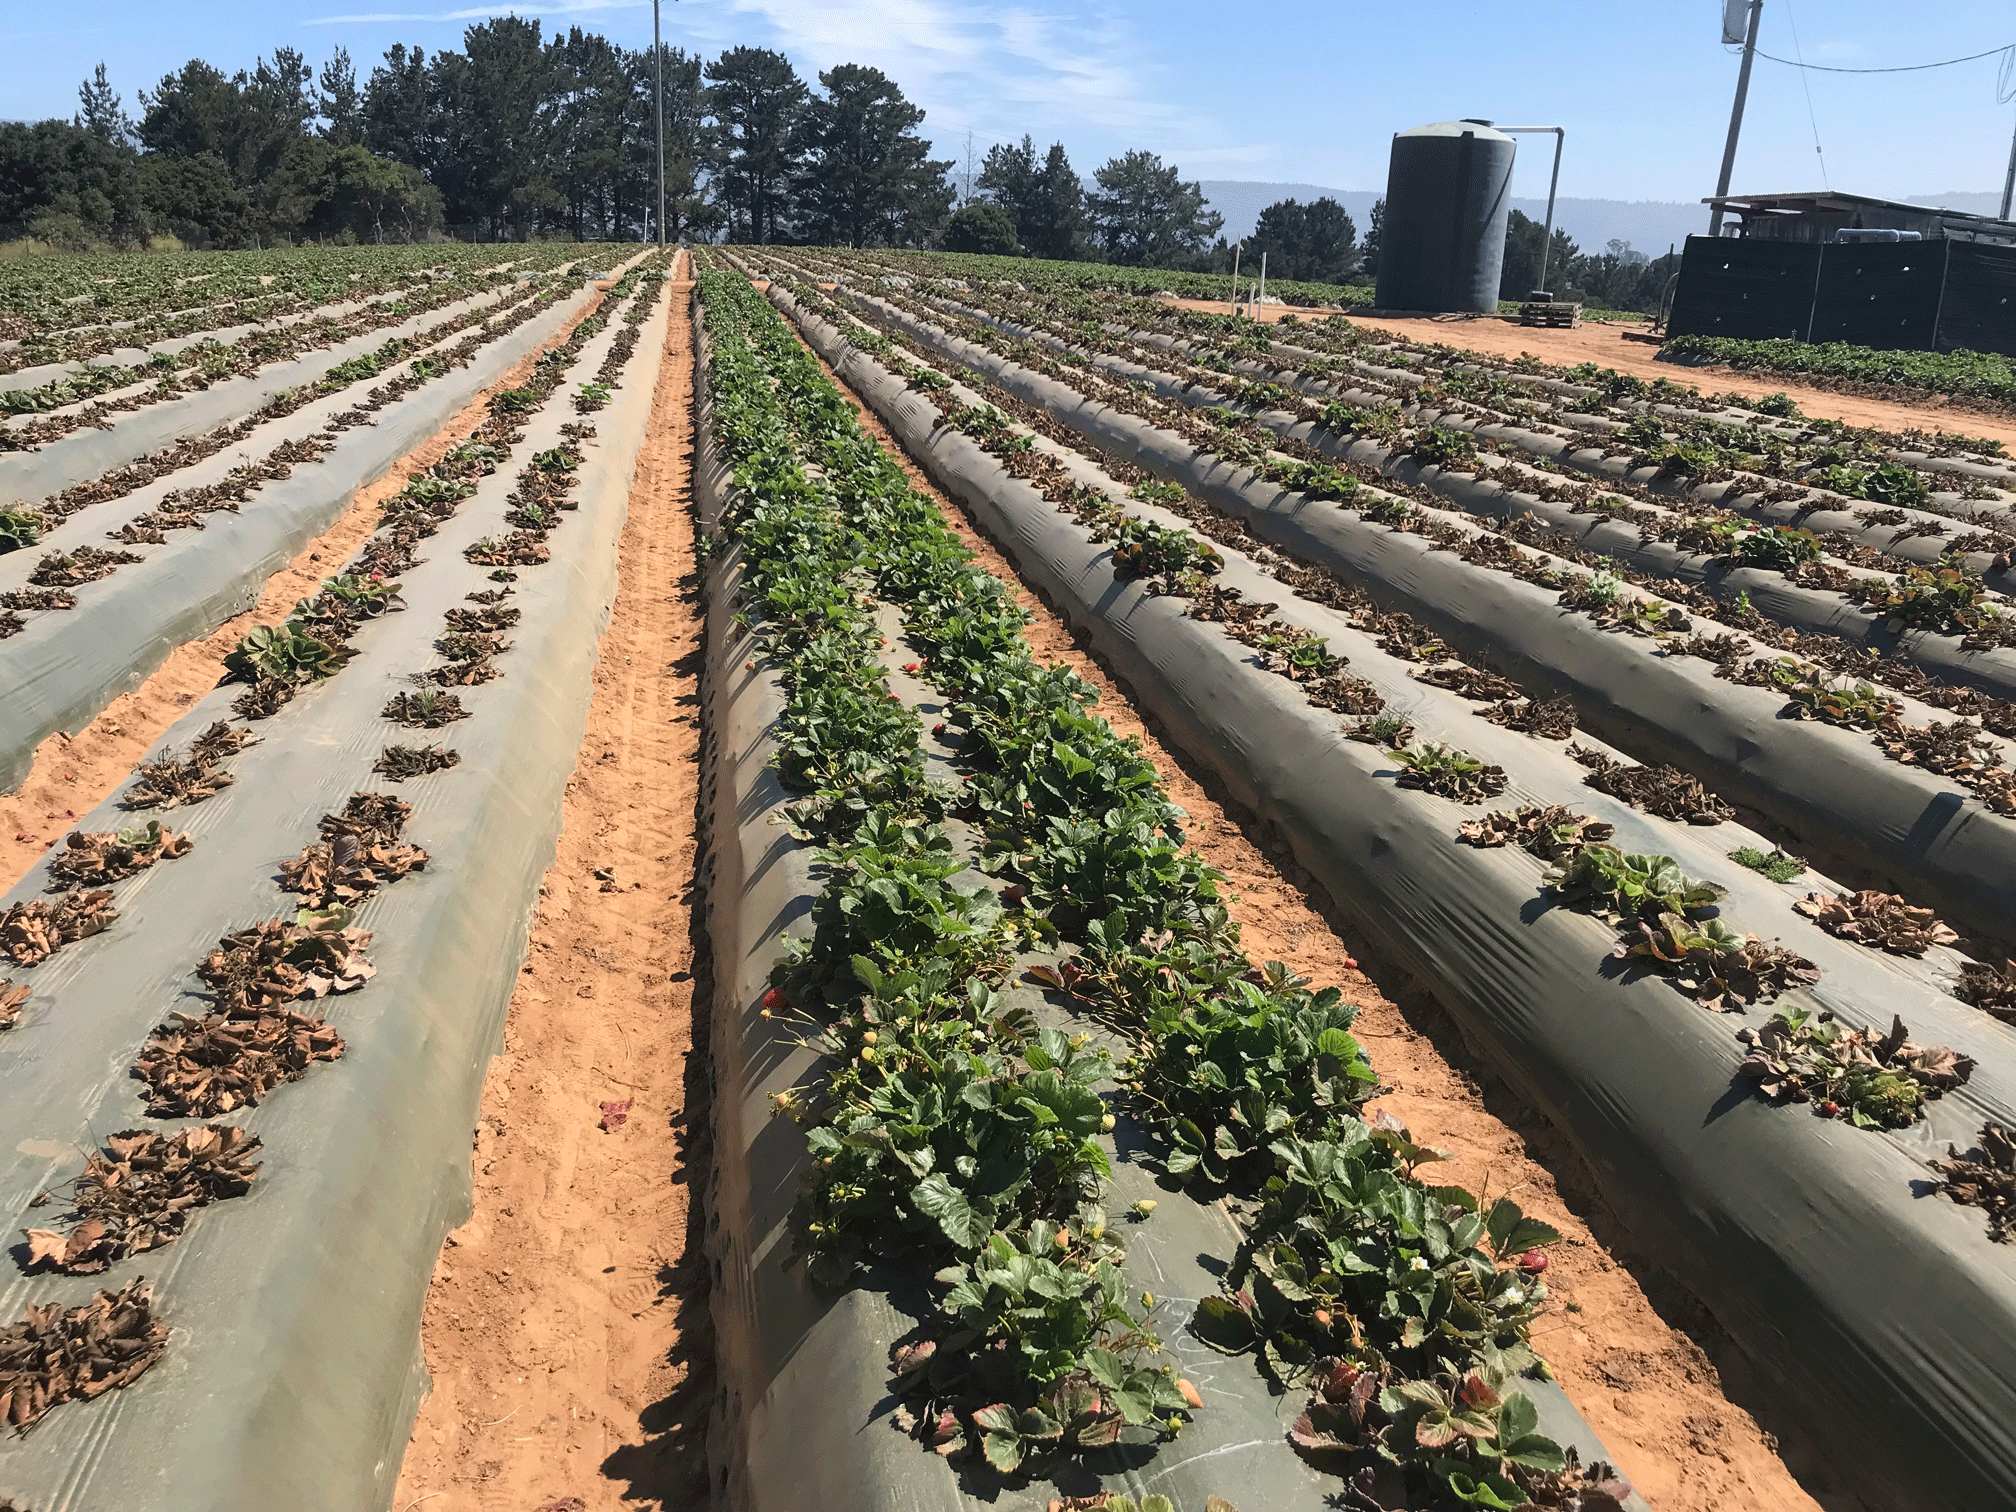 Resistant variety strawberries planted amid cultivars susceptible to Fusarium wilt. Photo courtesy of Glenn Cole